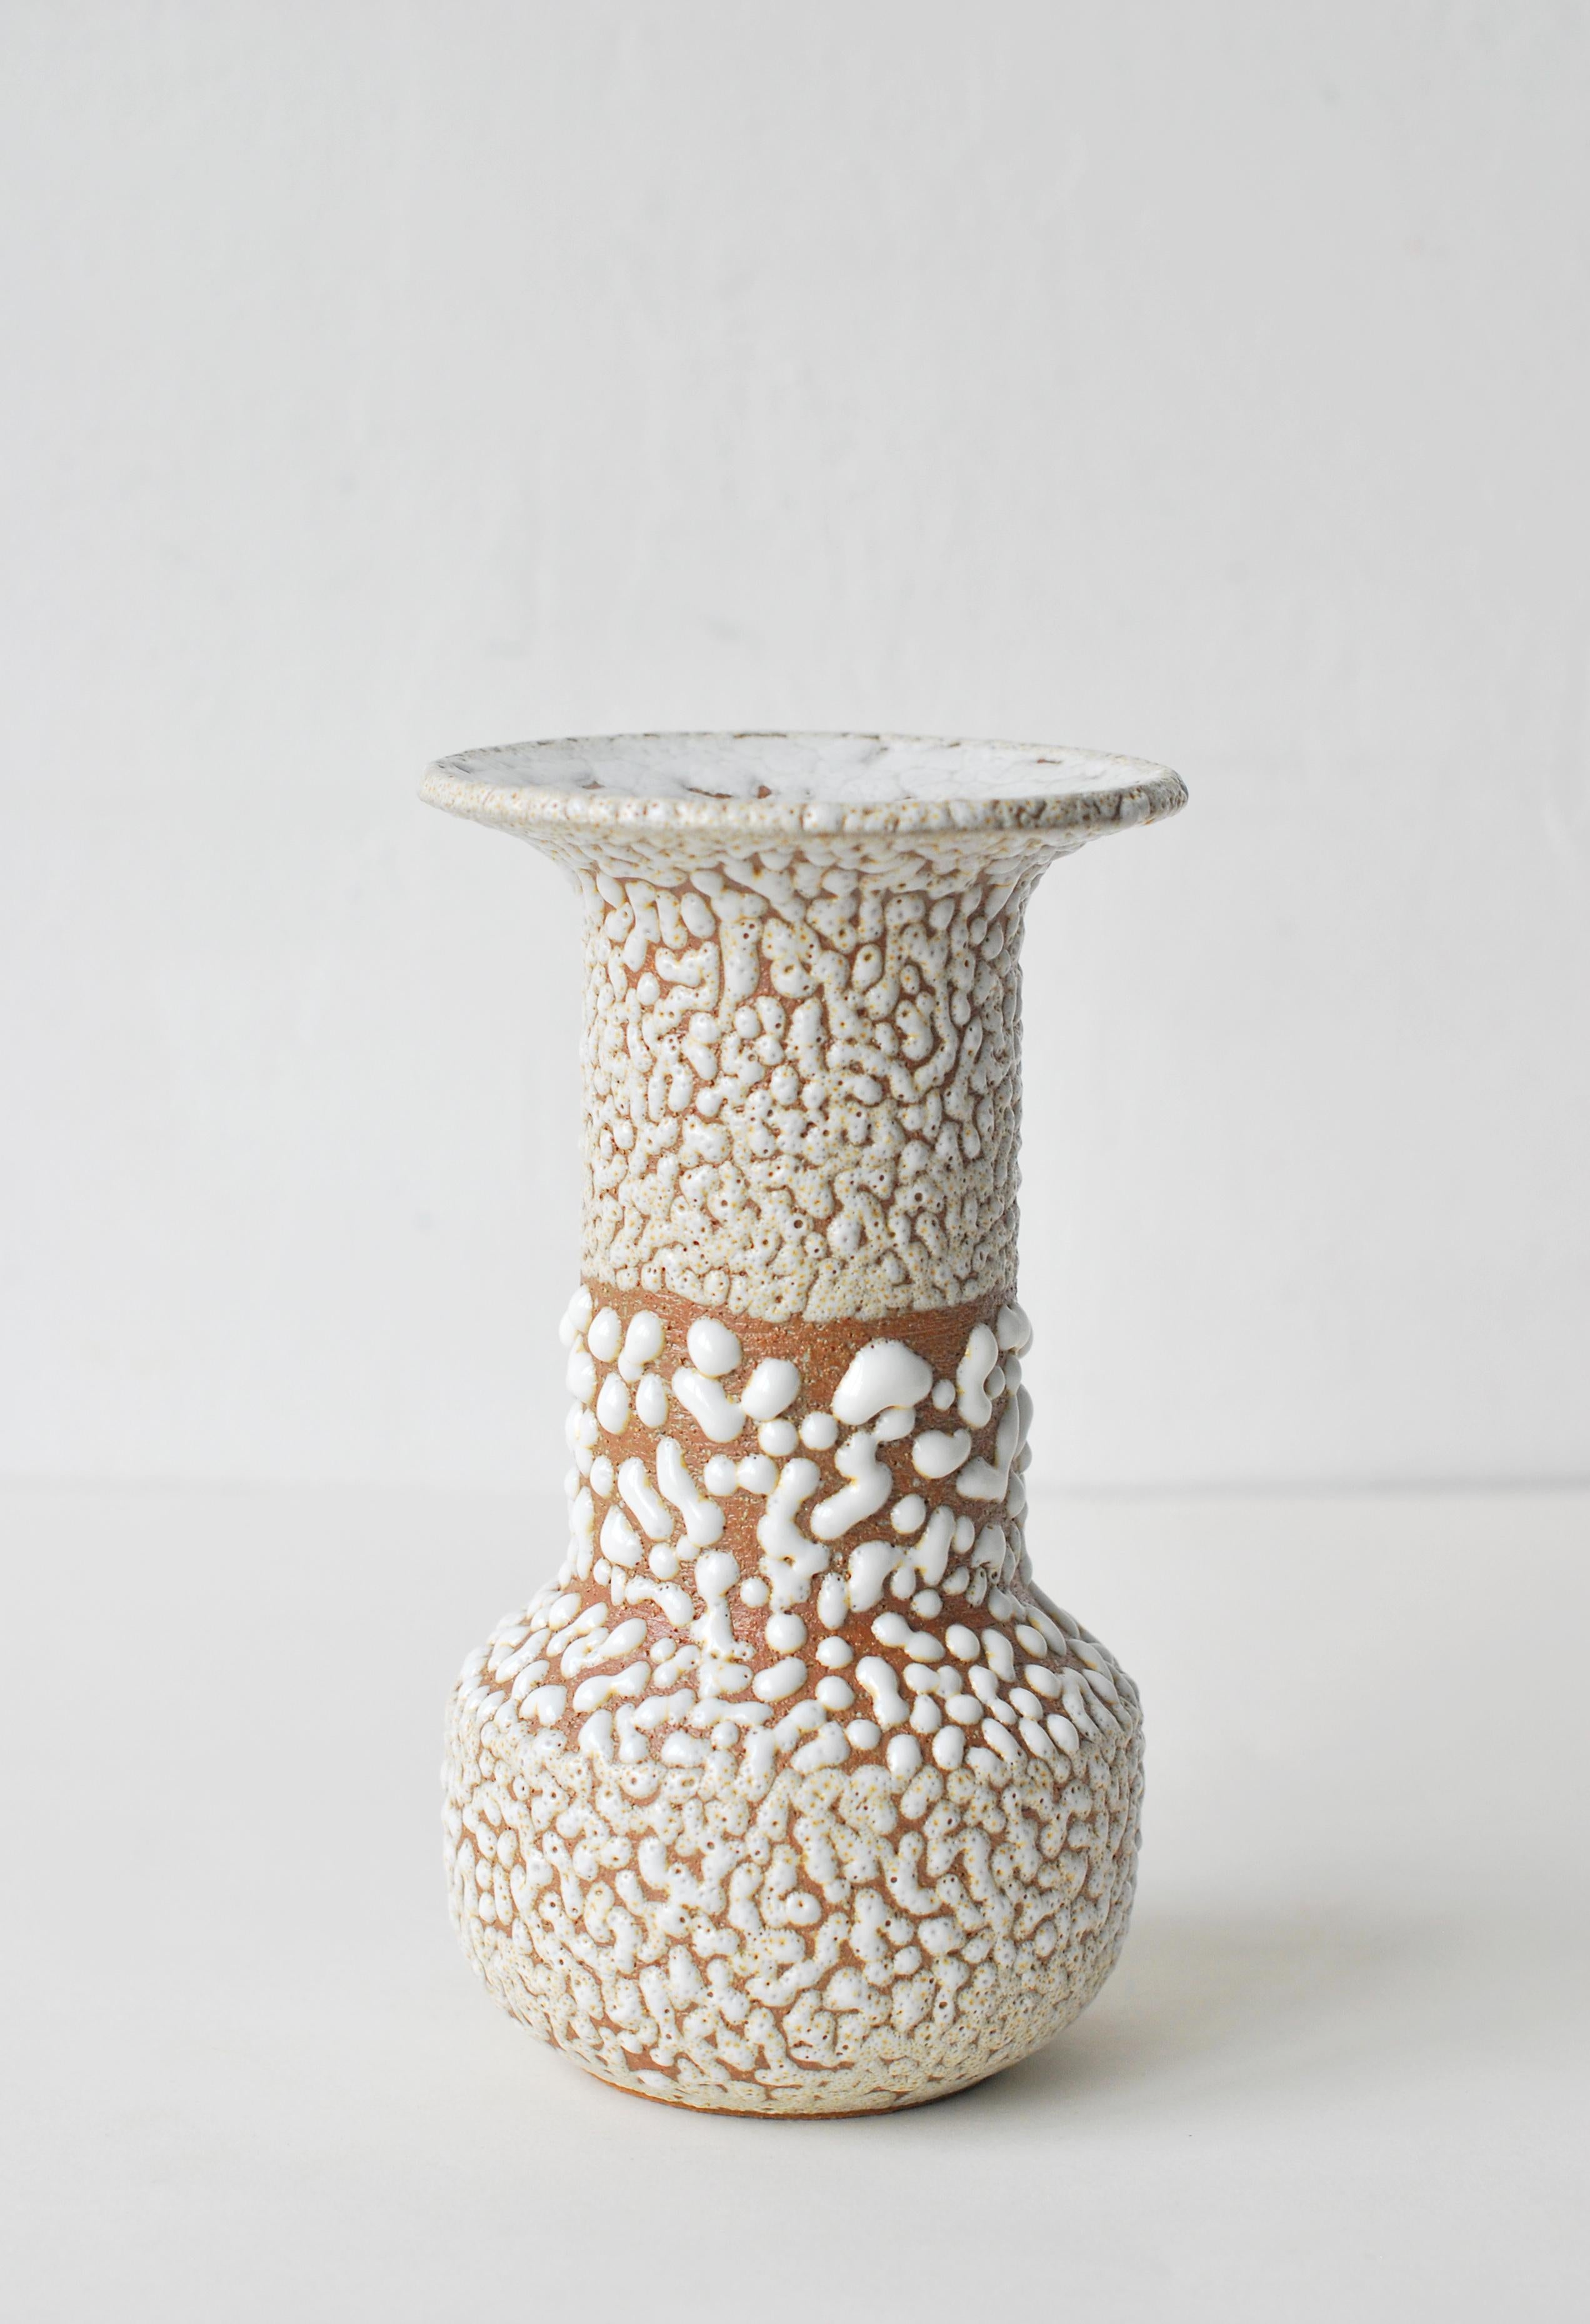 White stoneware vase by Moïo Studio
Dimensions: 16 x 6 x 6 cm
Materials: White crawl glaze on tan stoneware

Is the Berlin-based ceramic art studio of French-Palestinian artist Maia Beyrouti. It was created in 2016 as a result of the desire to